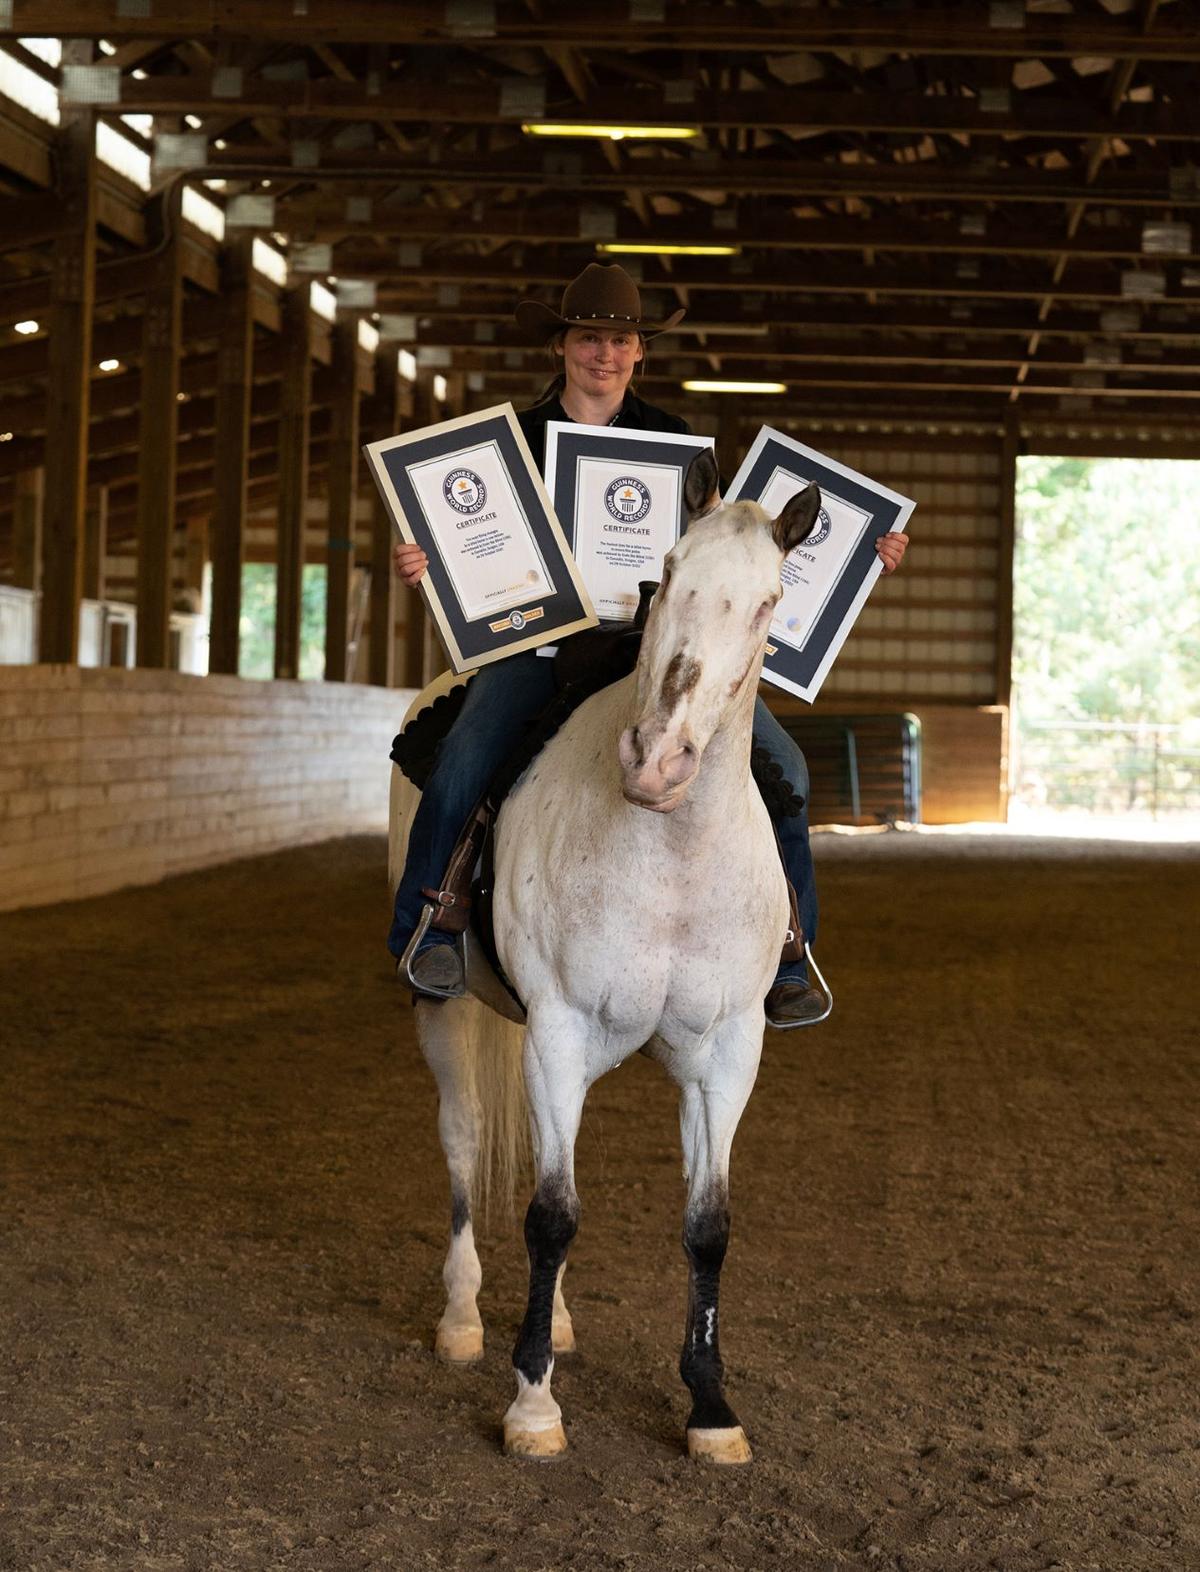 Morgan Wagner with "Endo the Blind" and his three Guinness World Record certificates. (Courtesy of Brittany Hirst Photography/GUINNESS WORLD RECORDS)